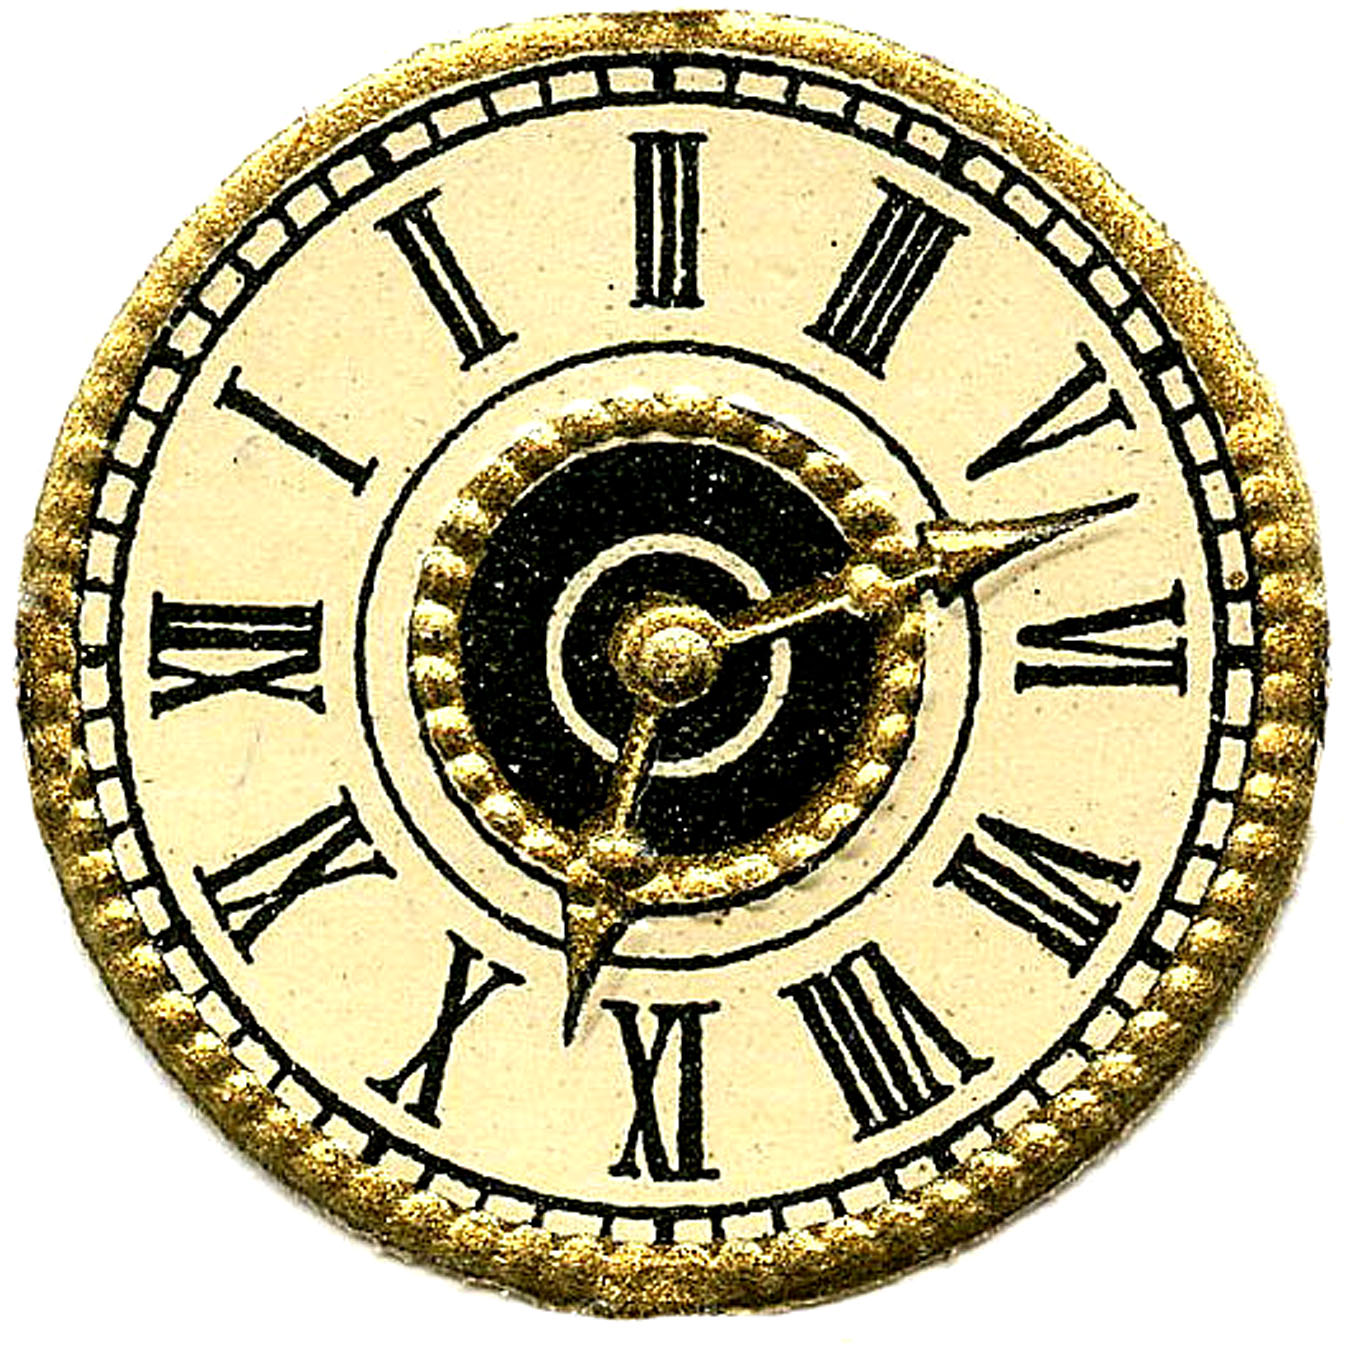 Vintage Images   More Cute Clock Faces   Steampunk   The Graphics